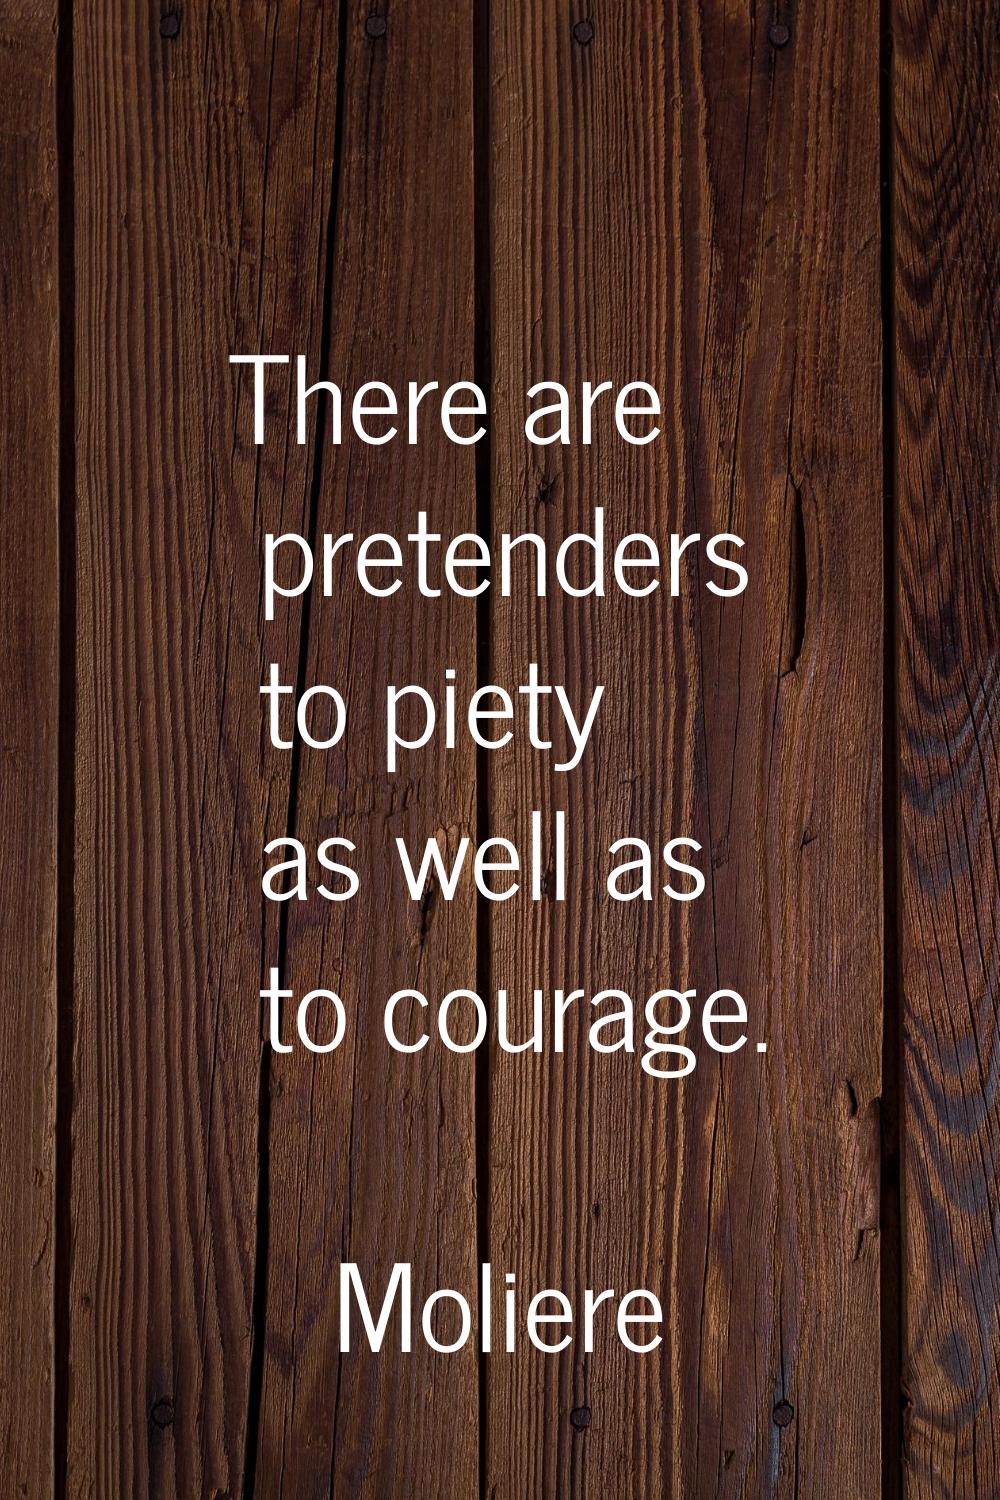 There are pretenders to piety as well as to courage.